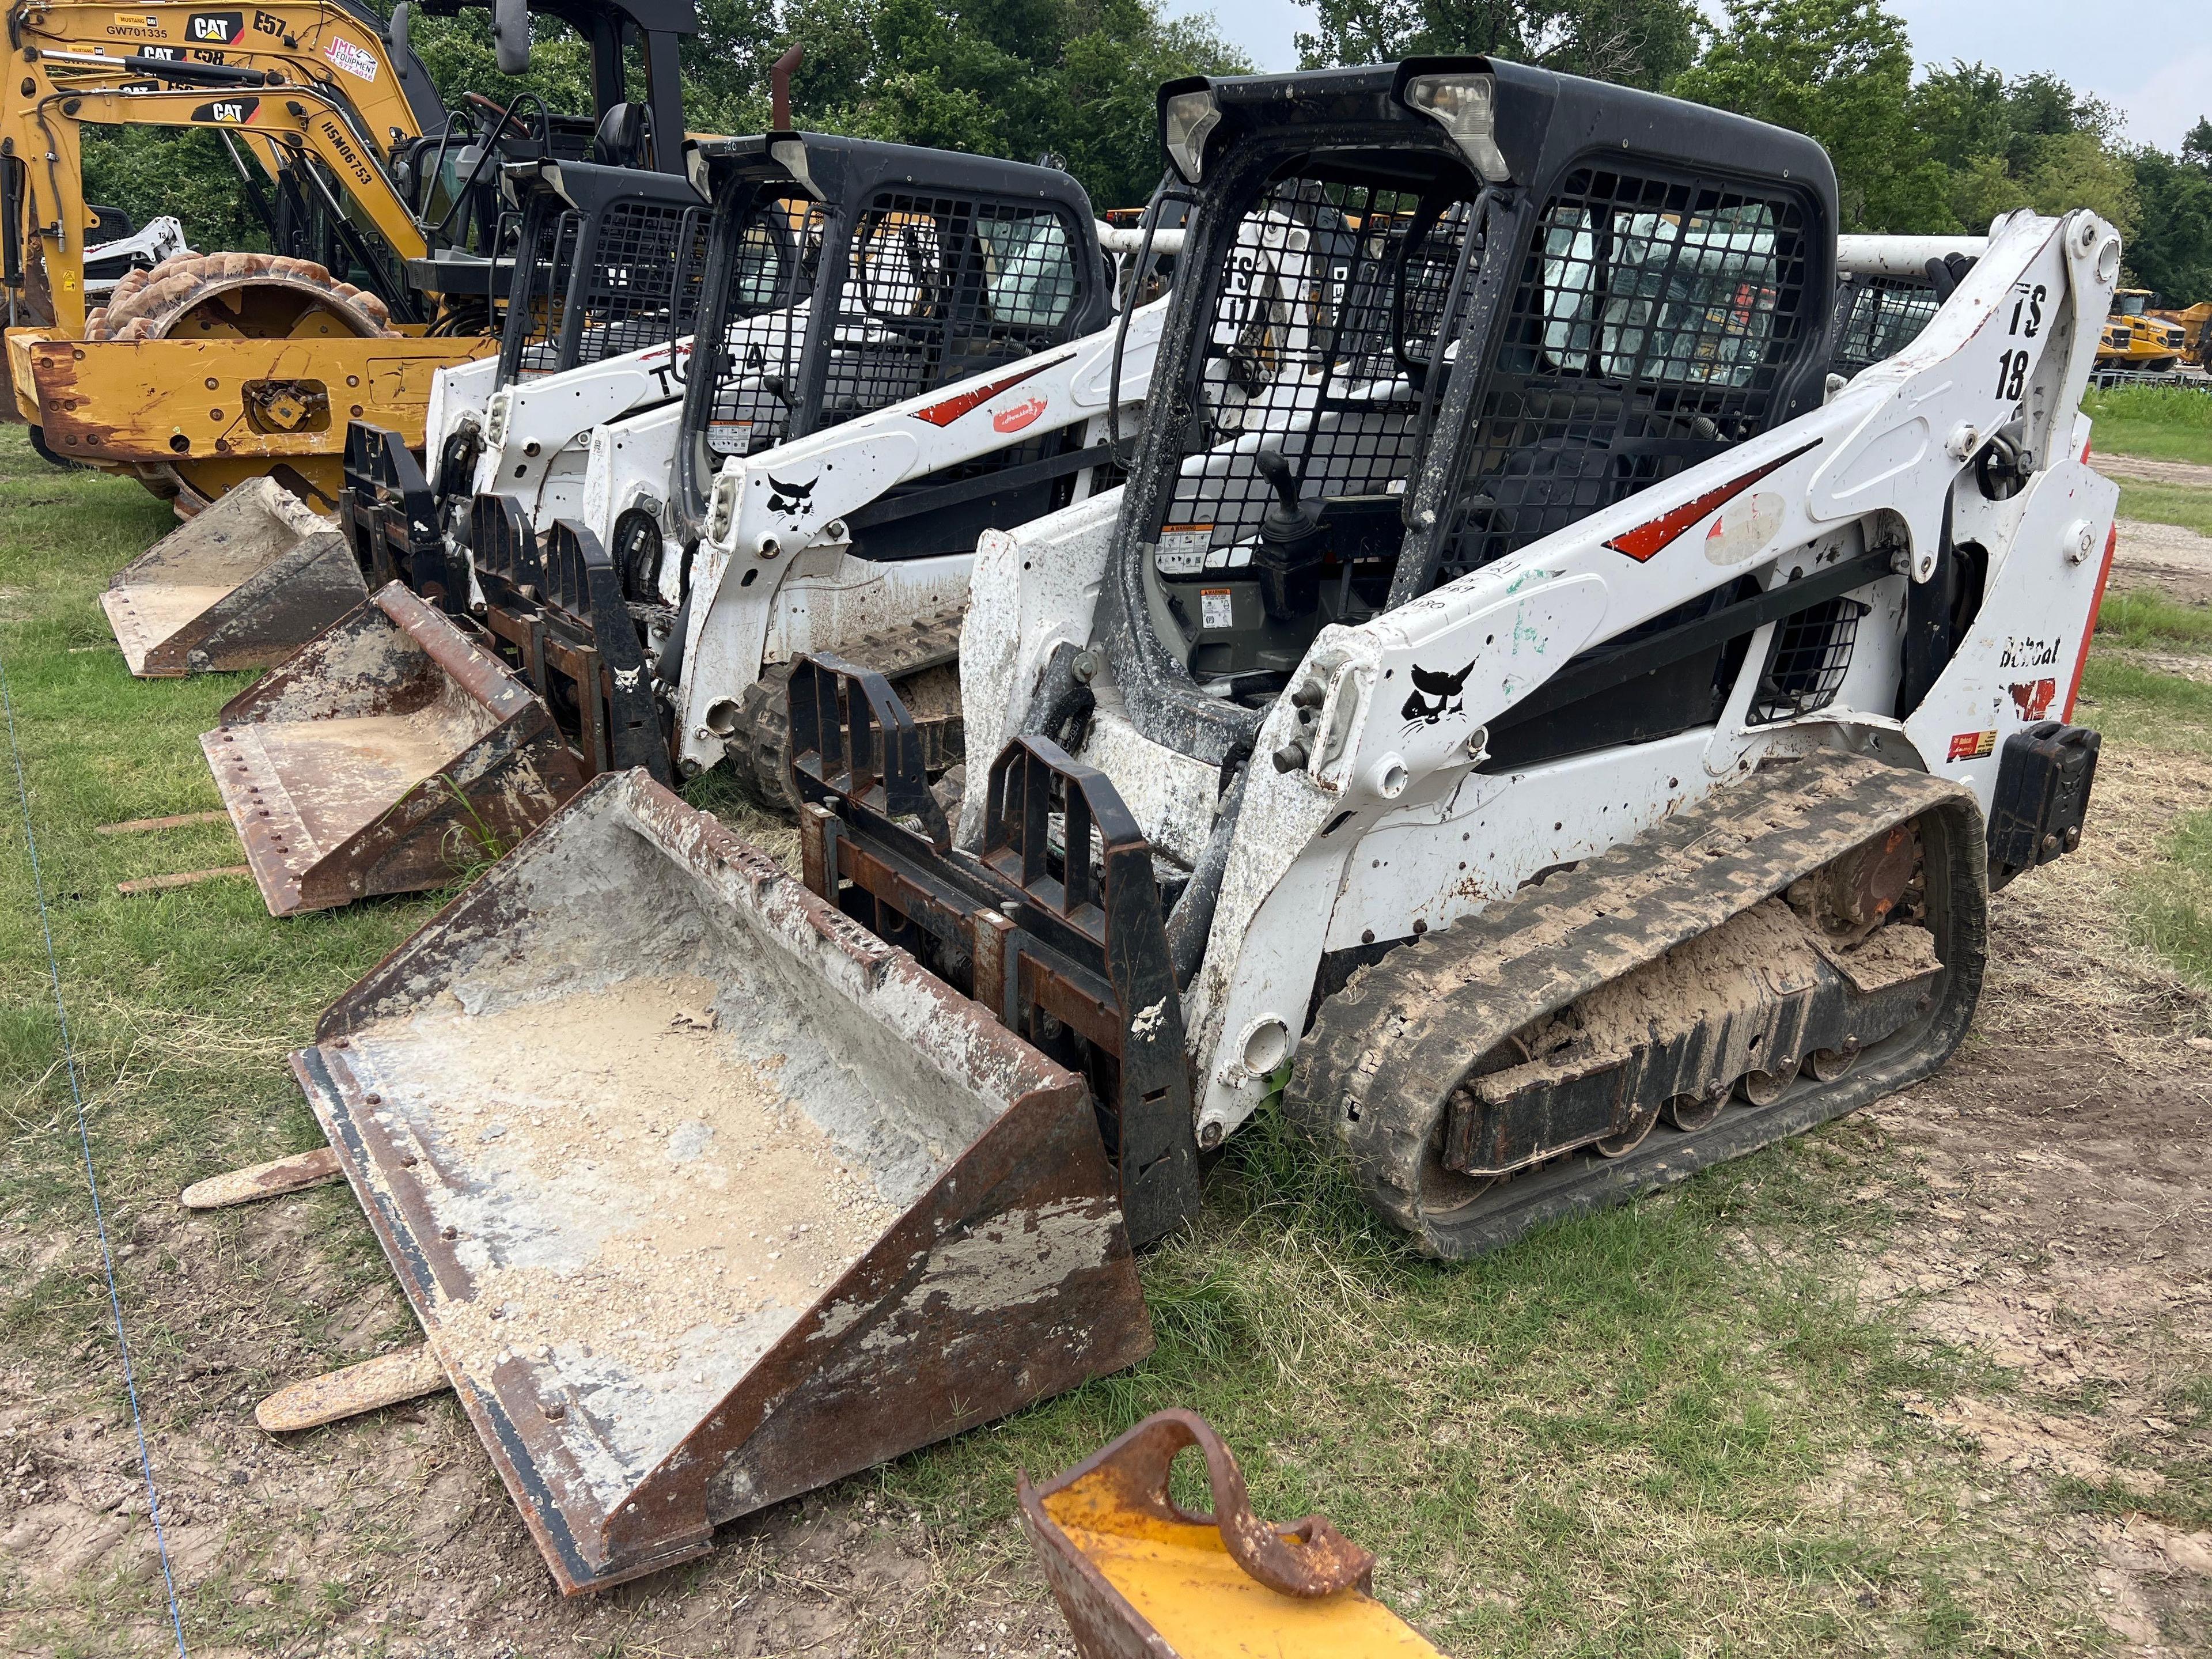 2020 BOBCAT T595 RUBBER TRACKED SKID STEER SN:B3NK36569 powered by diesel engine, equipped with